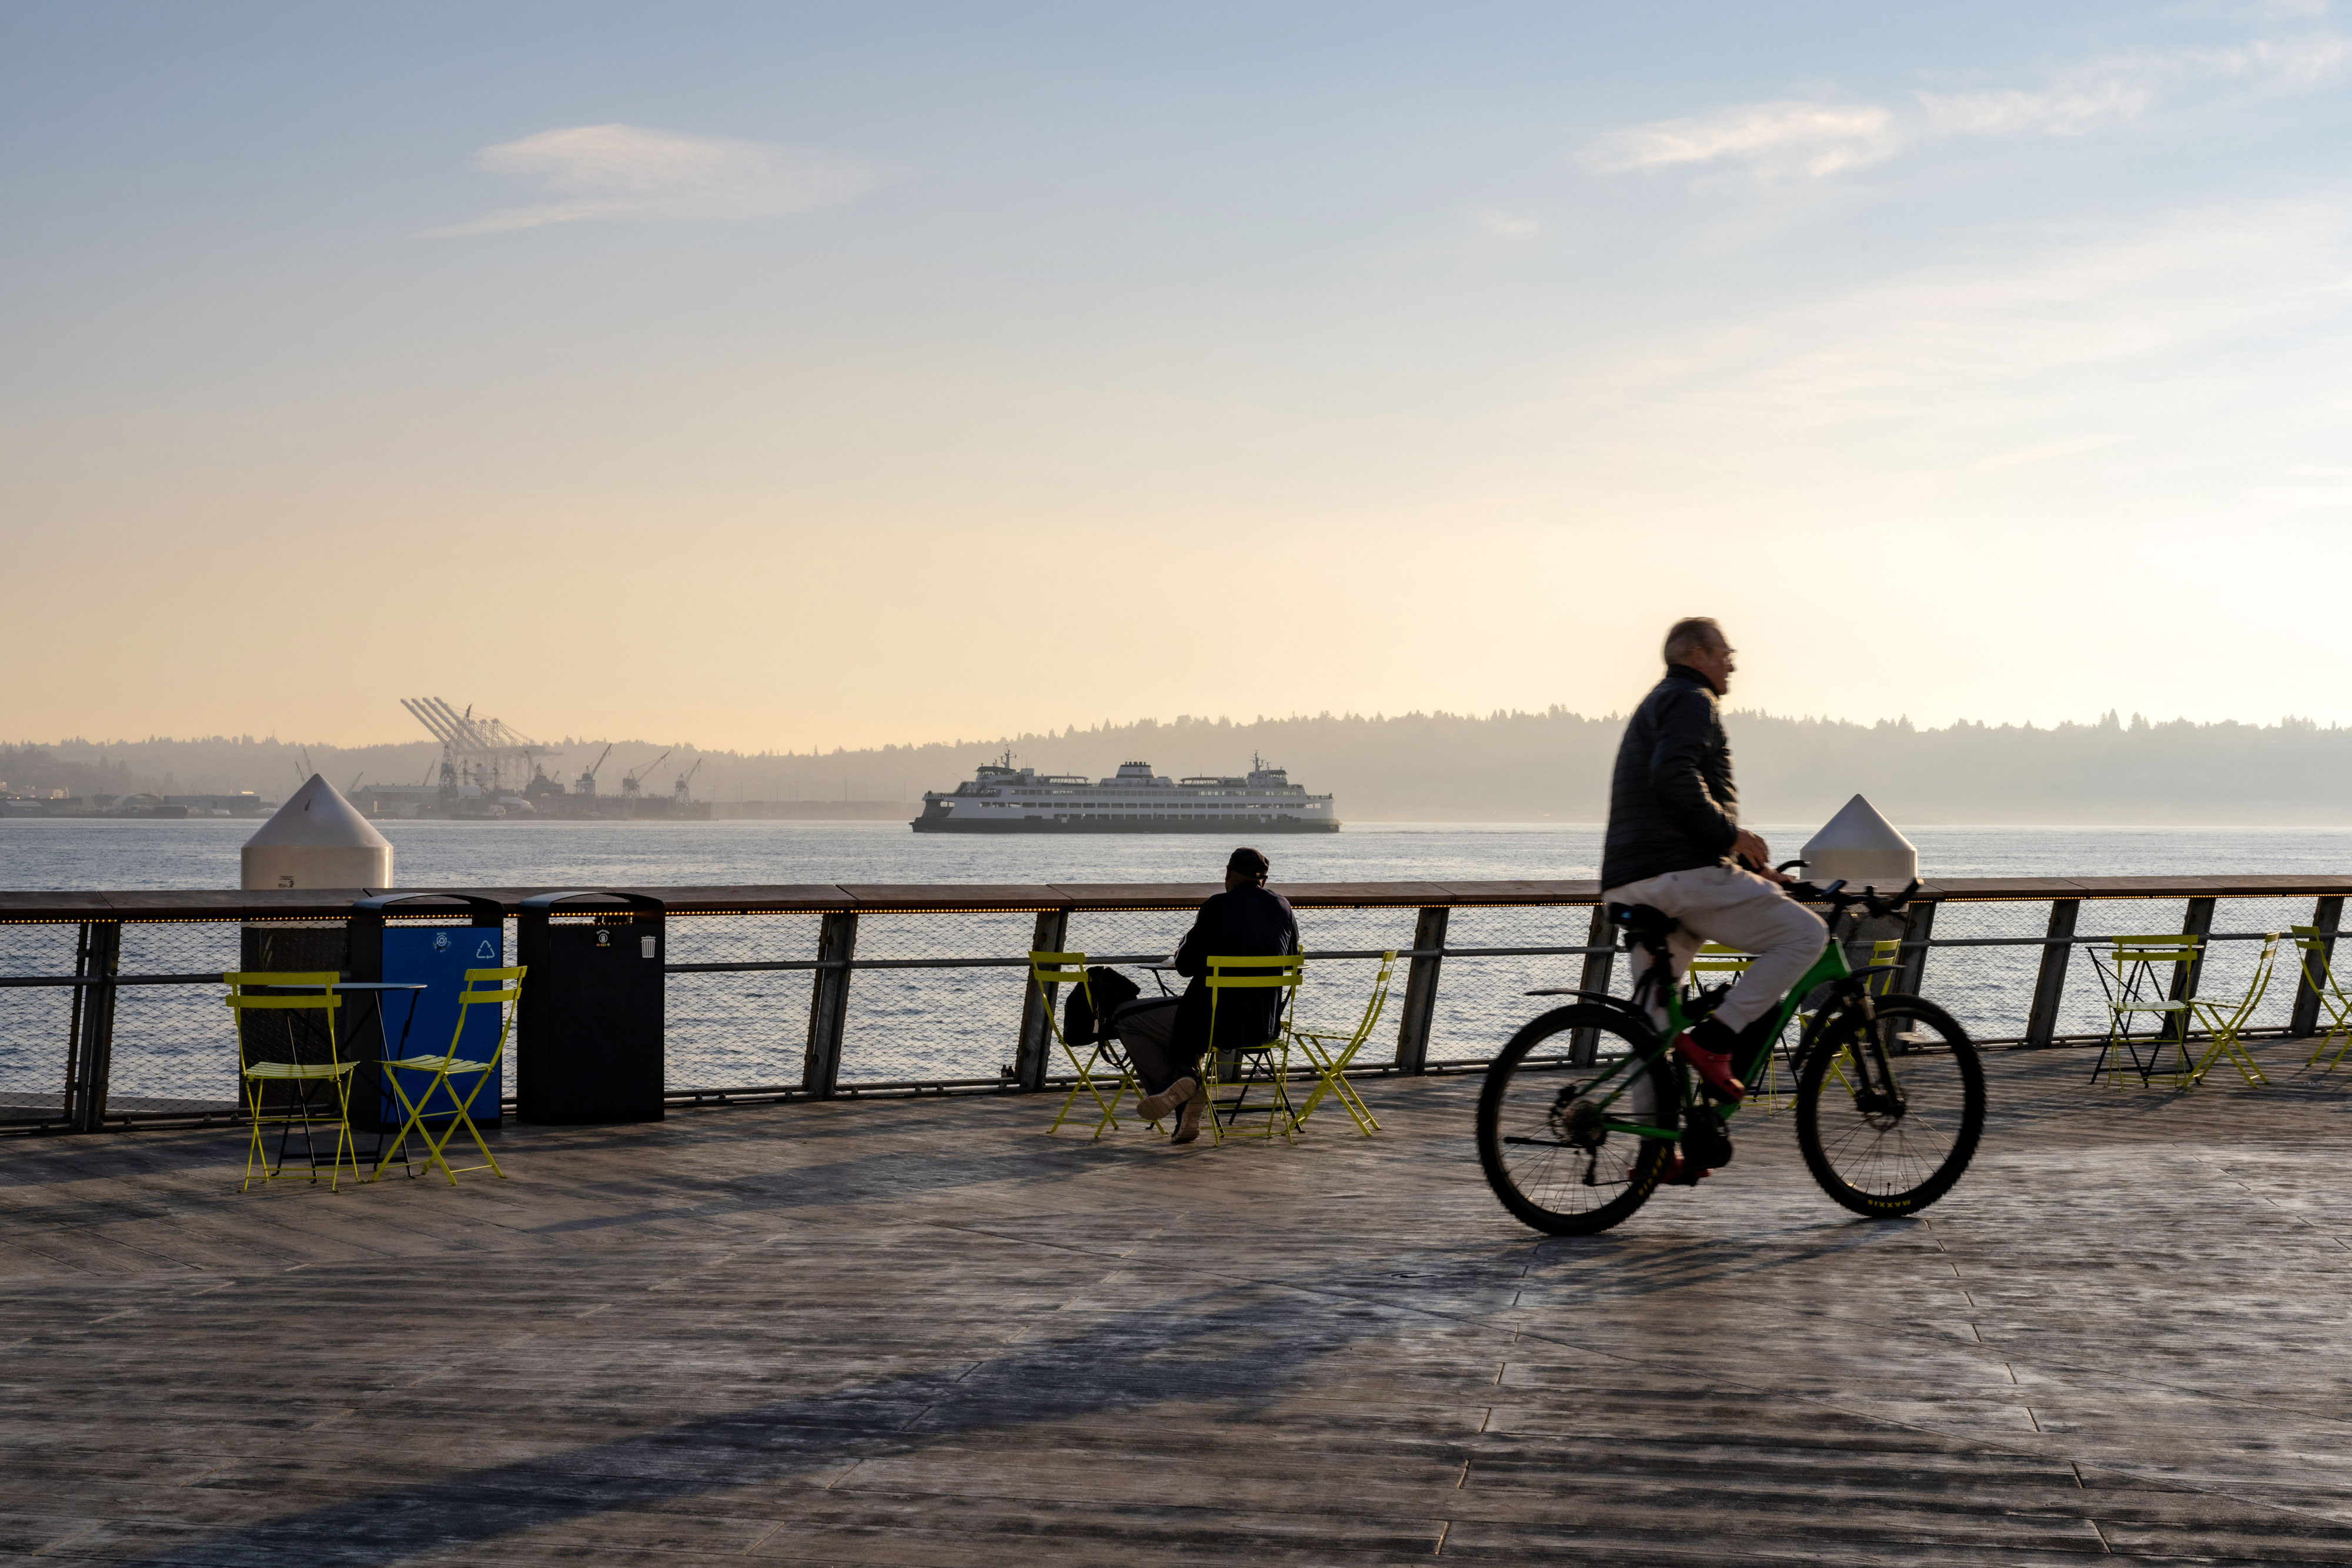 Man on a bike at pier, with a Ferry Boat in the background in Seattle